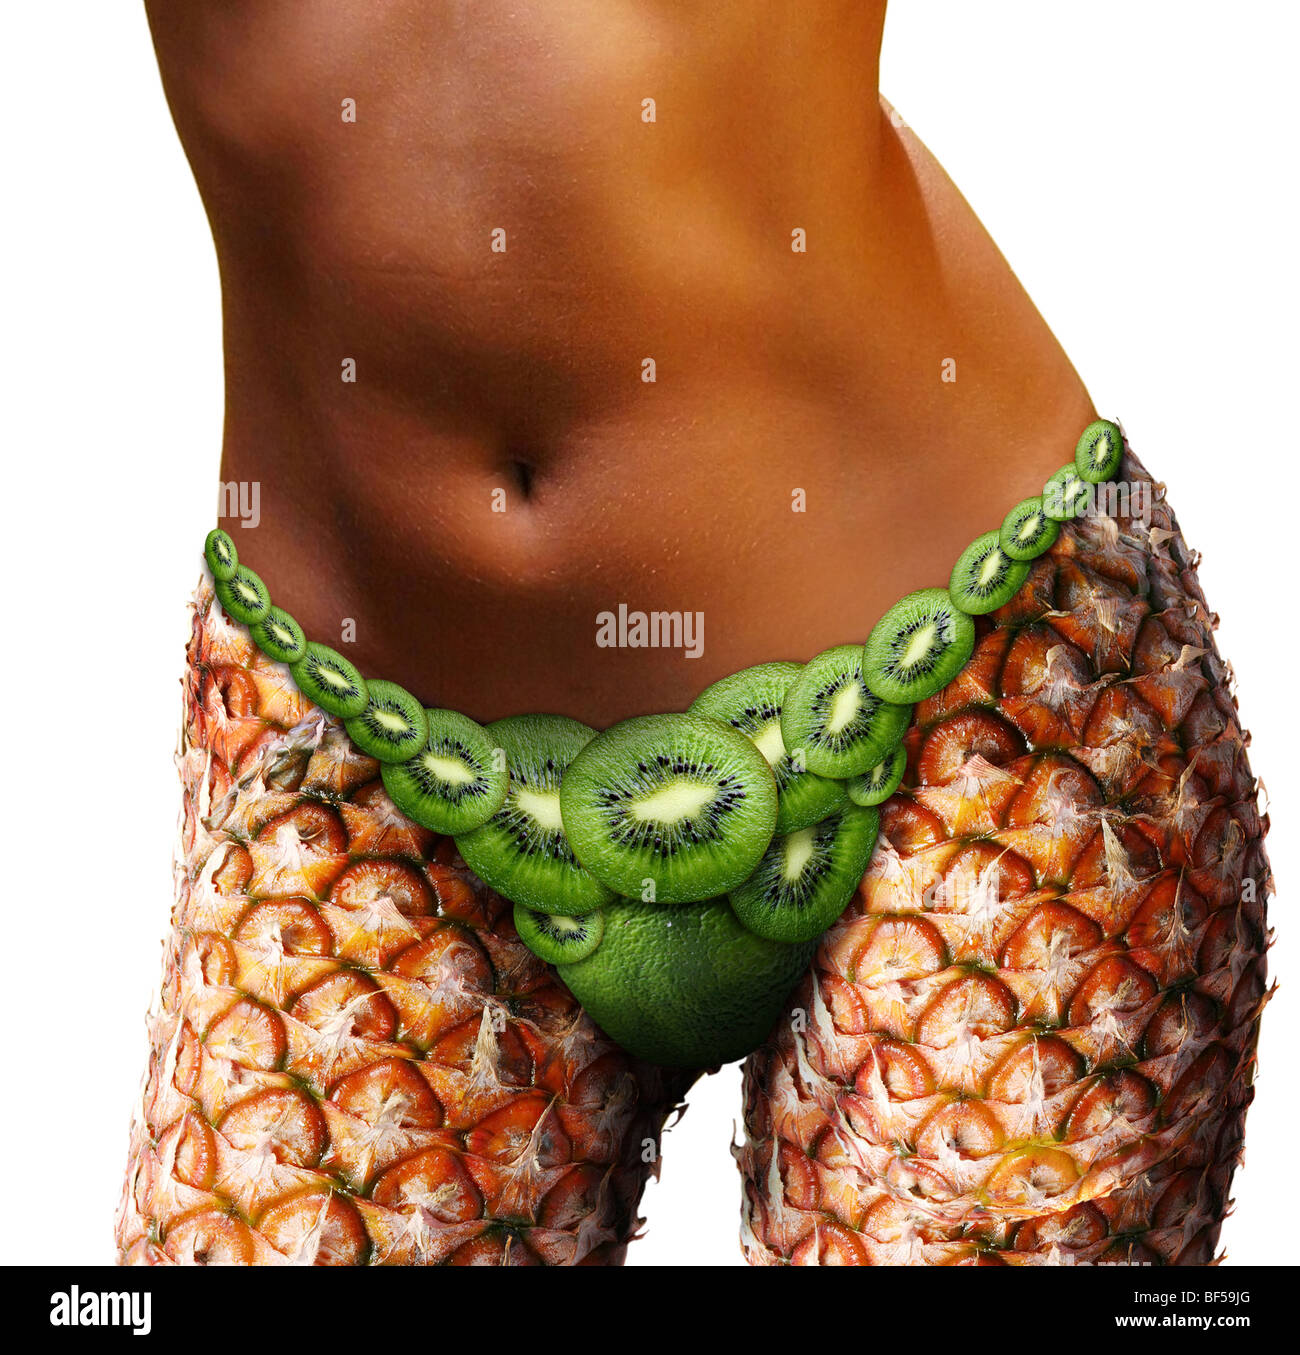 Girl body made from fruits on a white background Stock Photo